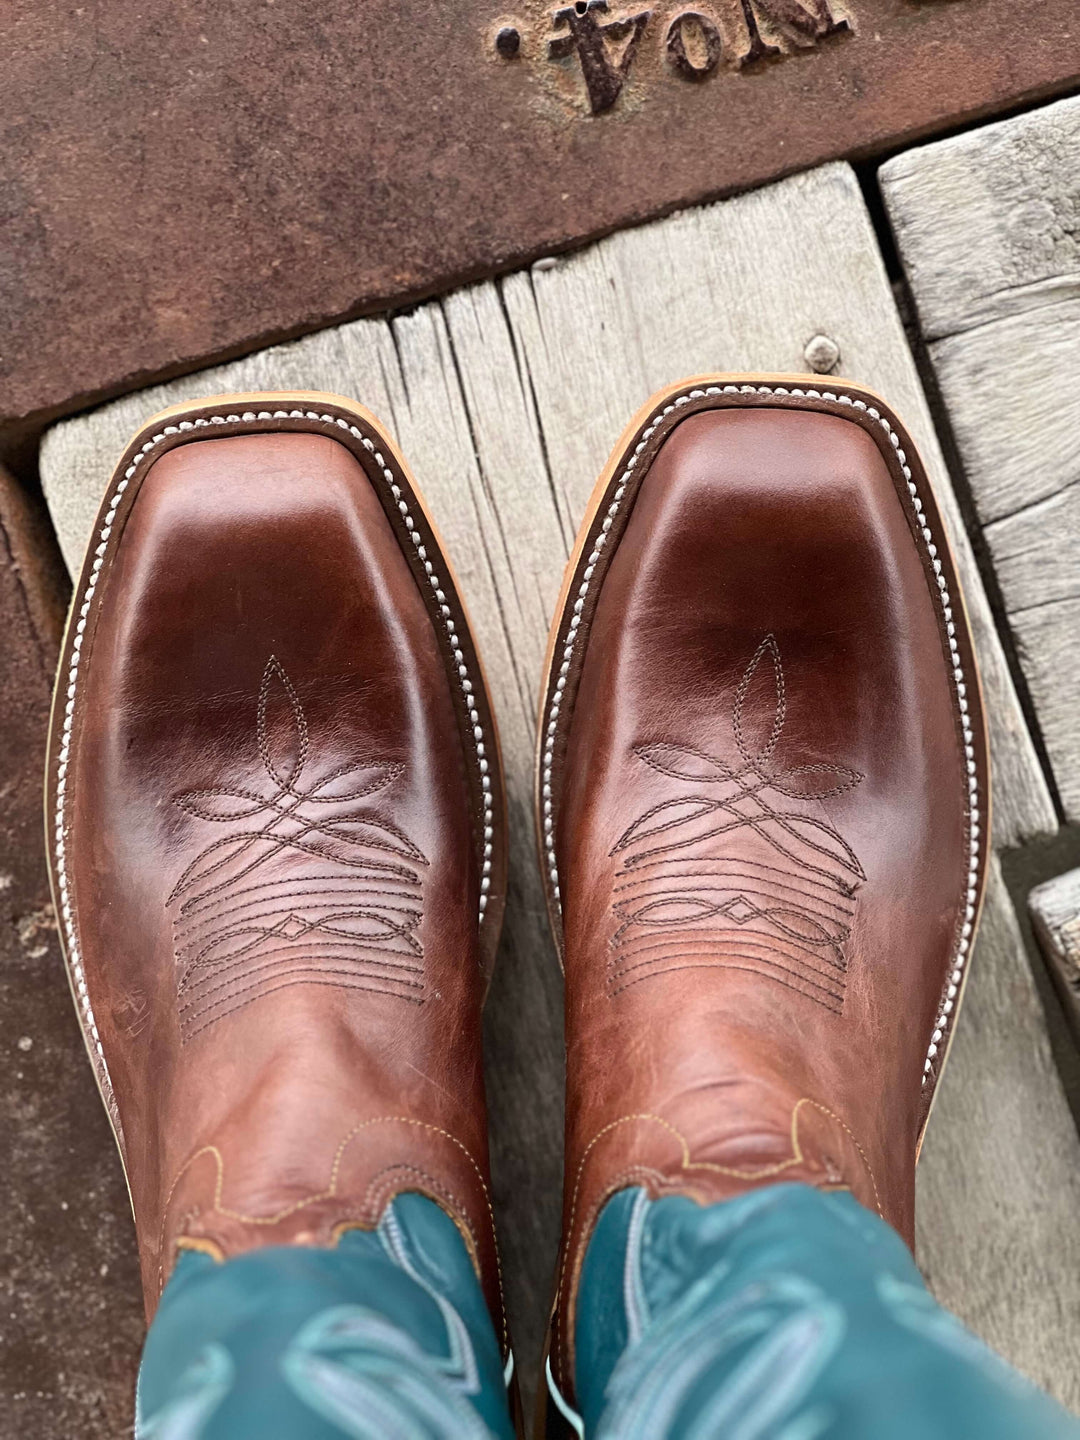 Toe View Olathe Boot Co.  | Chocolate Horsebutt Tall Top Boot View 